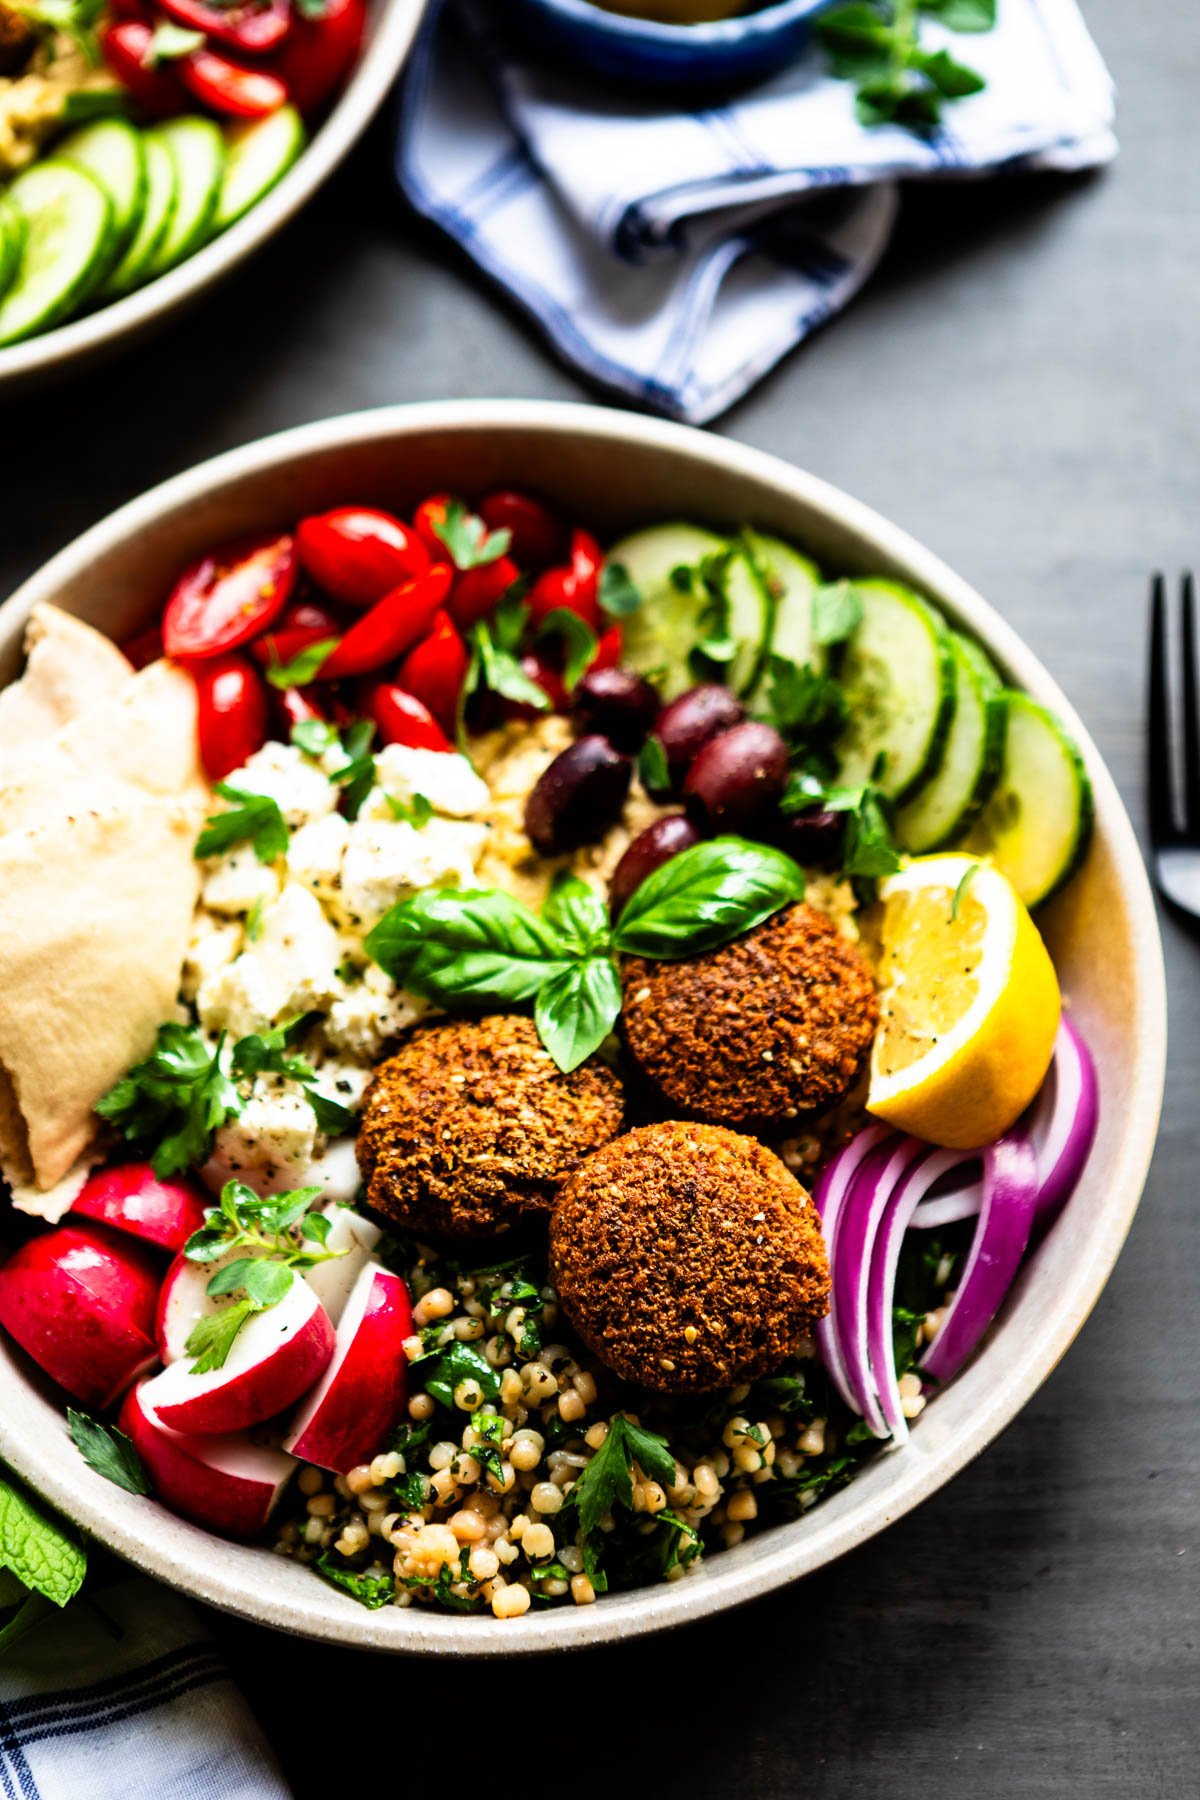 a bowl full of vegan falafel, couscous, red onion, radishes, pita, olives and other Mediterranean-inspired ingredients.